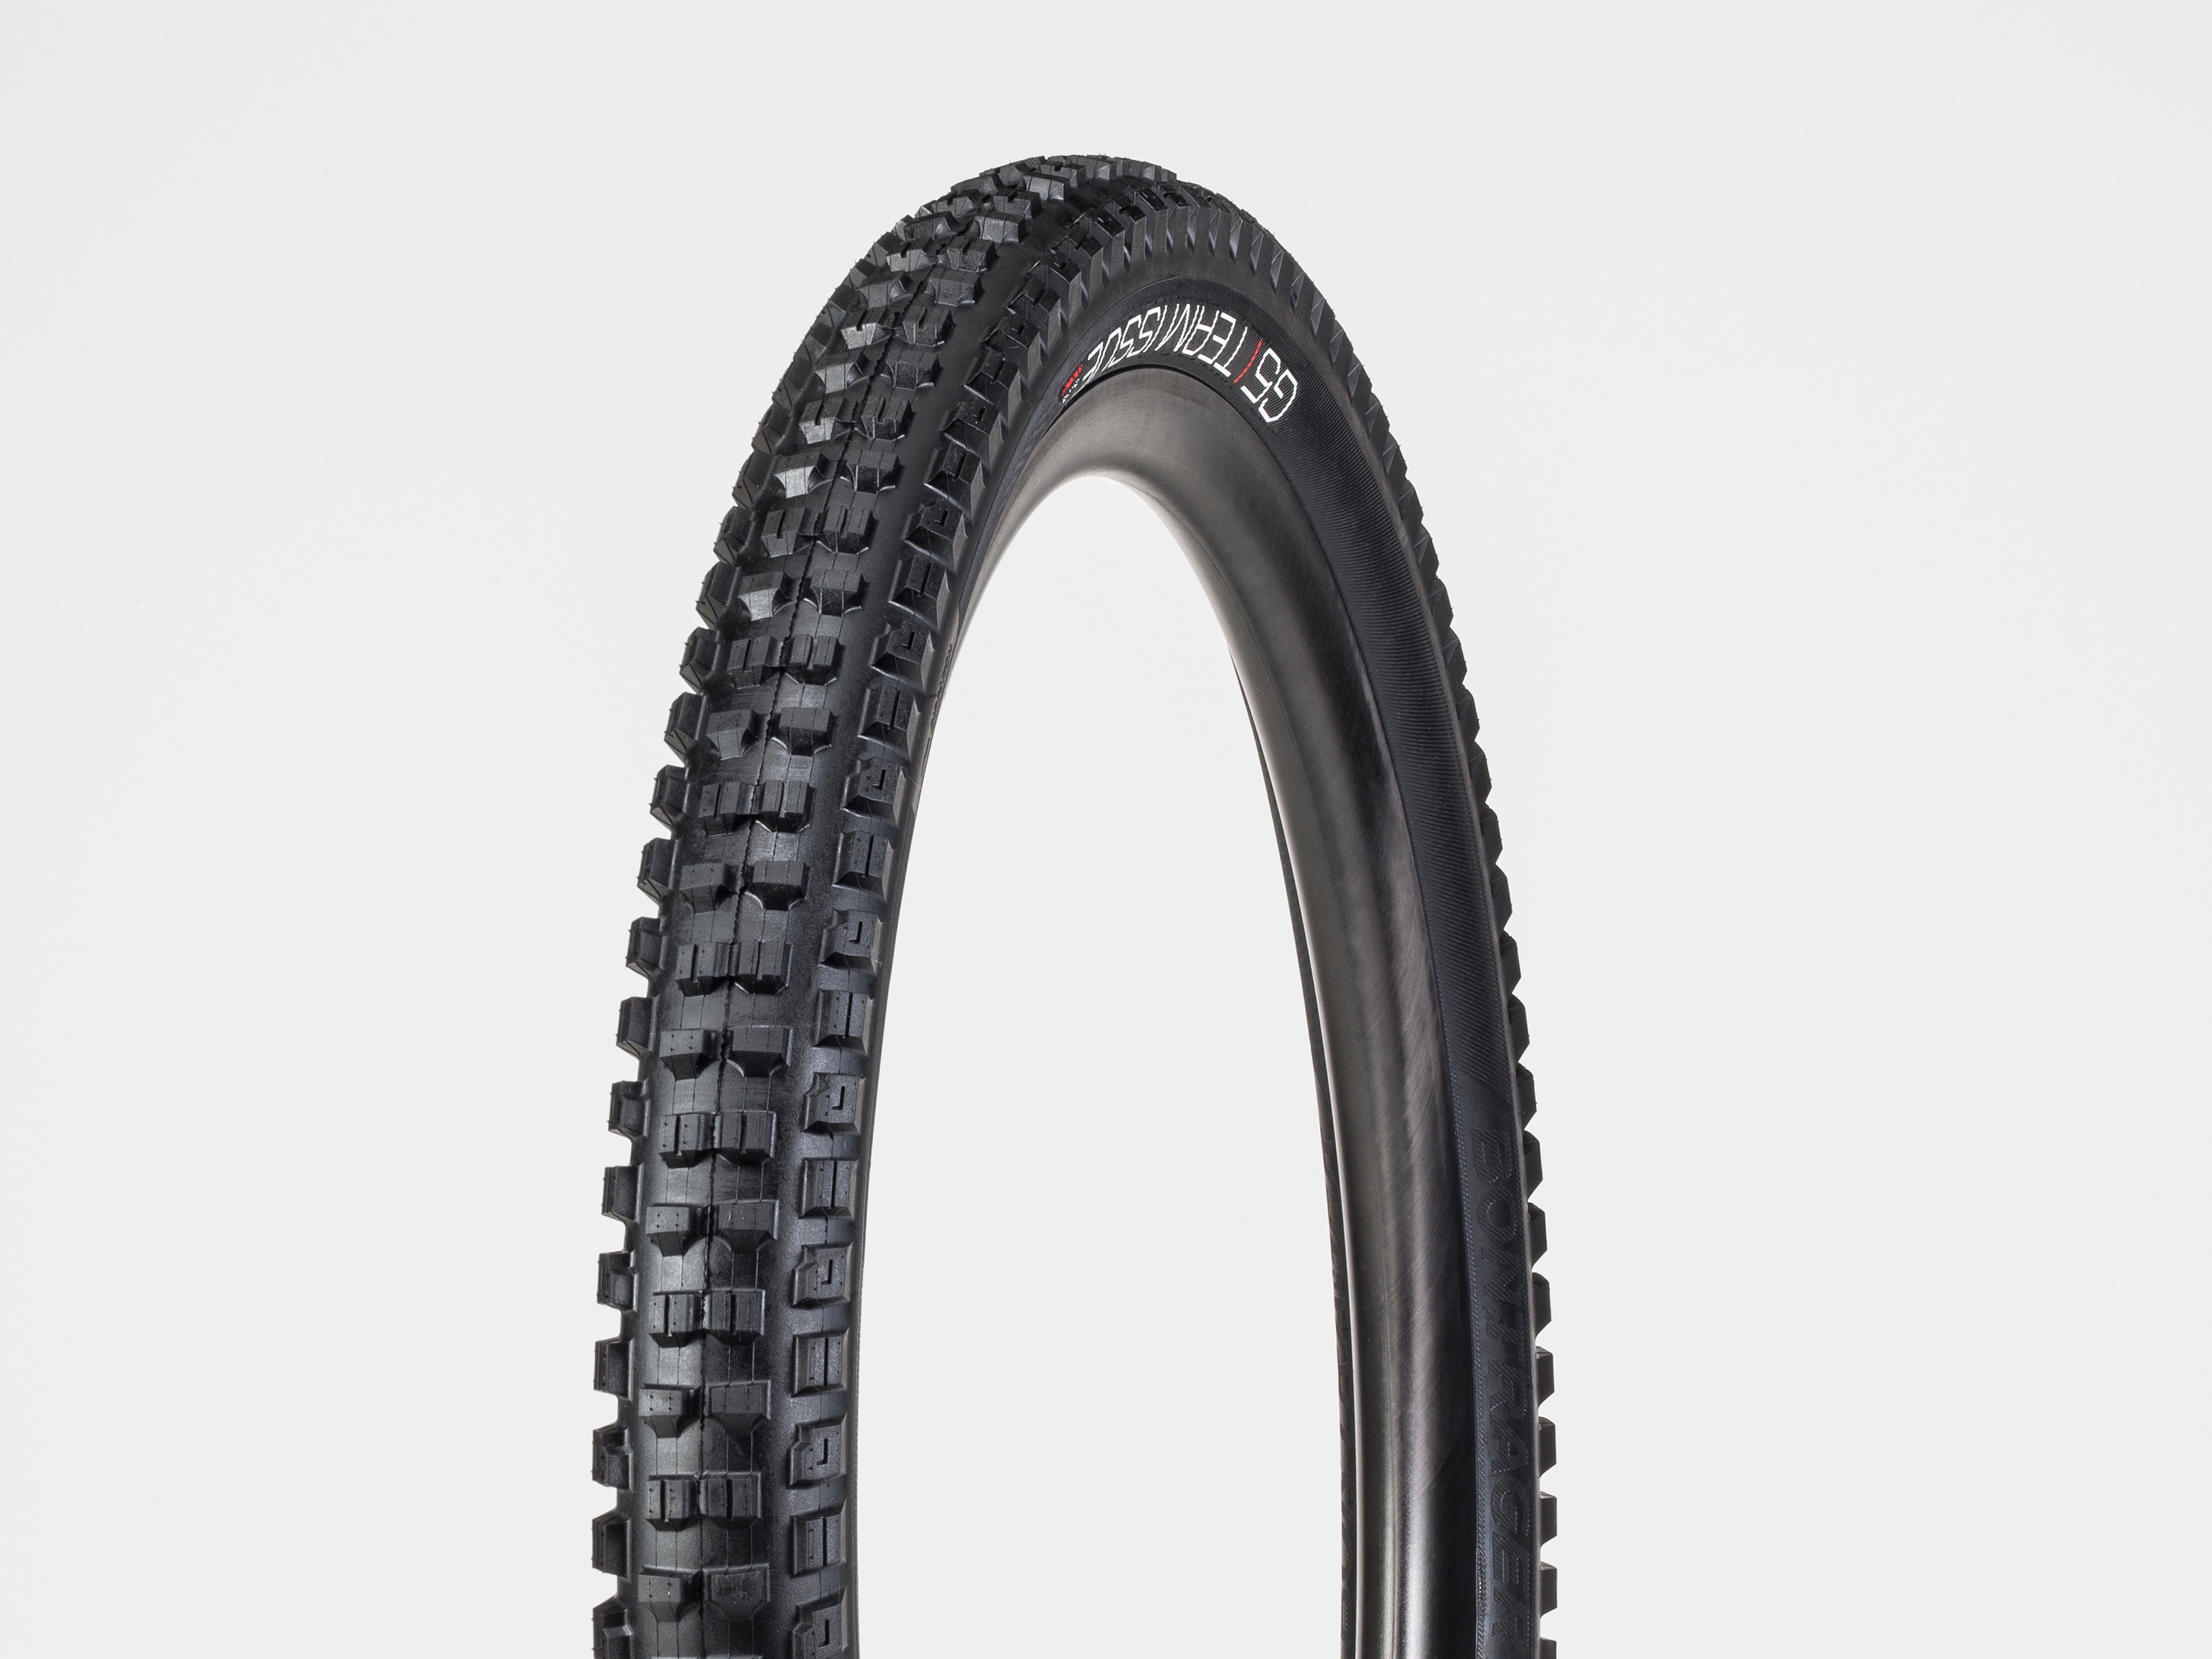 cycle tyre price